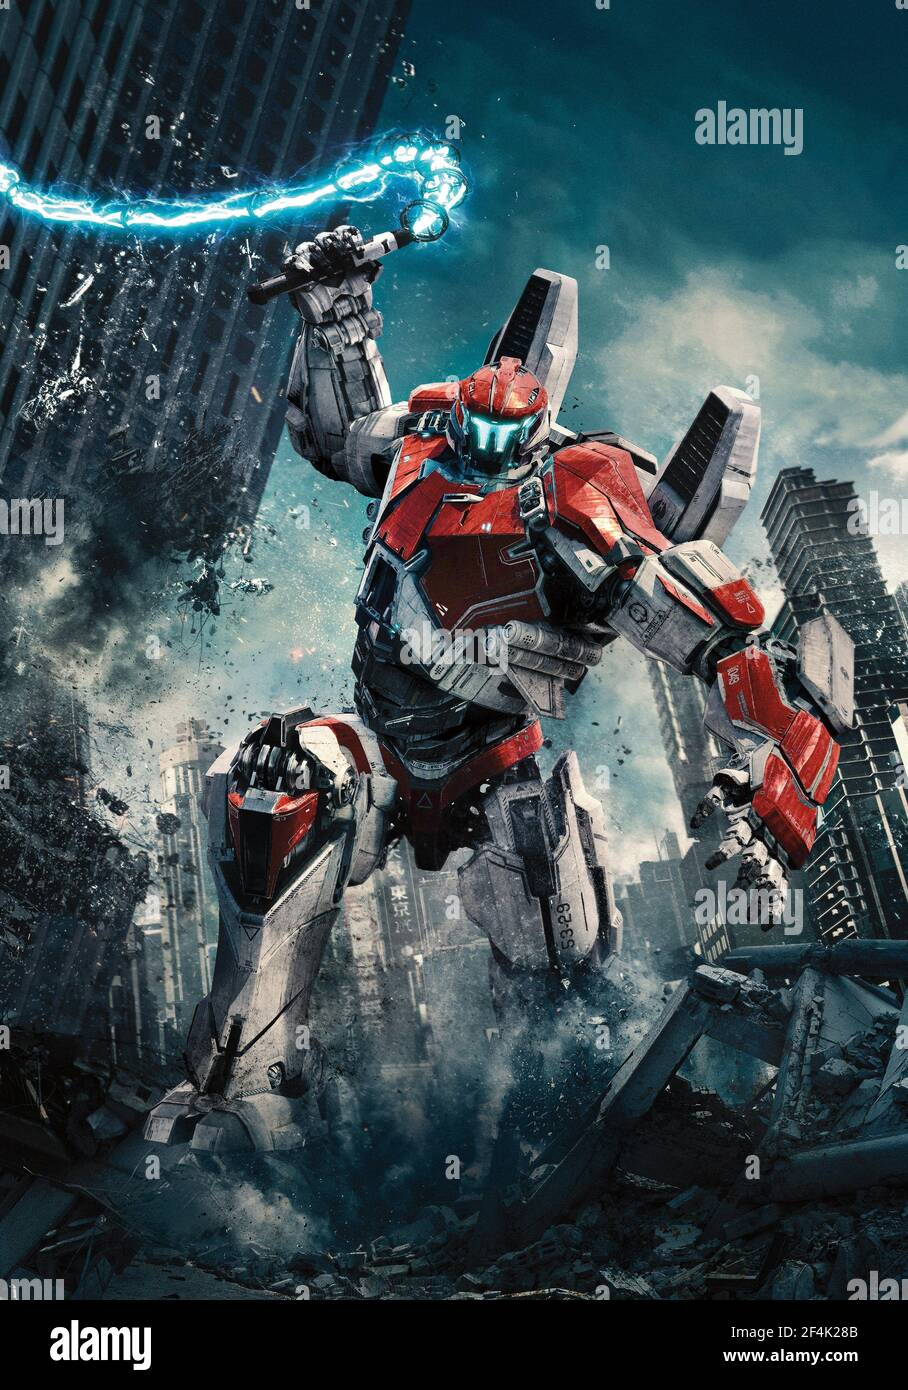 PACIFIC RIM: UPRISING (2018), directed by STEVEN S. DEKNIGHT. Copyright: Editorial use only. No merchandising or book covers. This is a publicly distributed handout. Access rights only, no license of copyright provided. Only to be reproduced in conjunction with promotion of this film. Credit: DOUBLE DARE YOU (DDY)/DOUBLE NEGATVE/LEGENDARY ENTERTAINMENT / Album Stock Photo